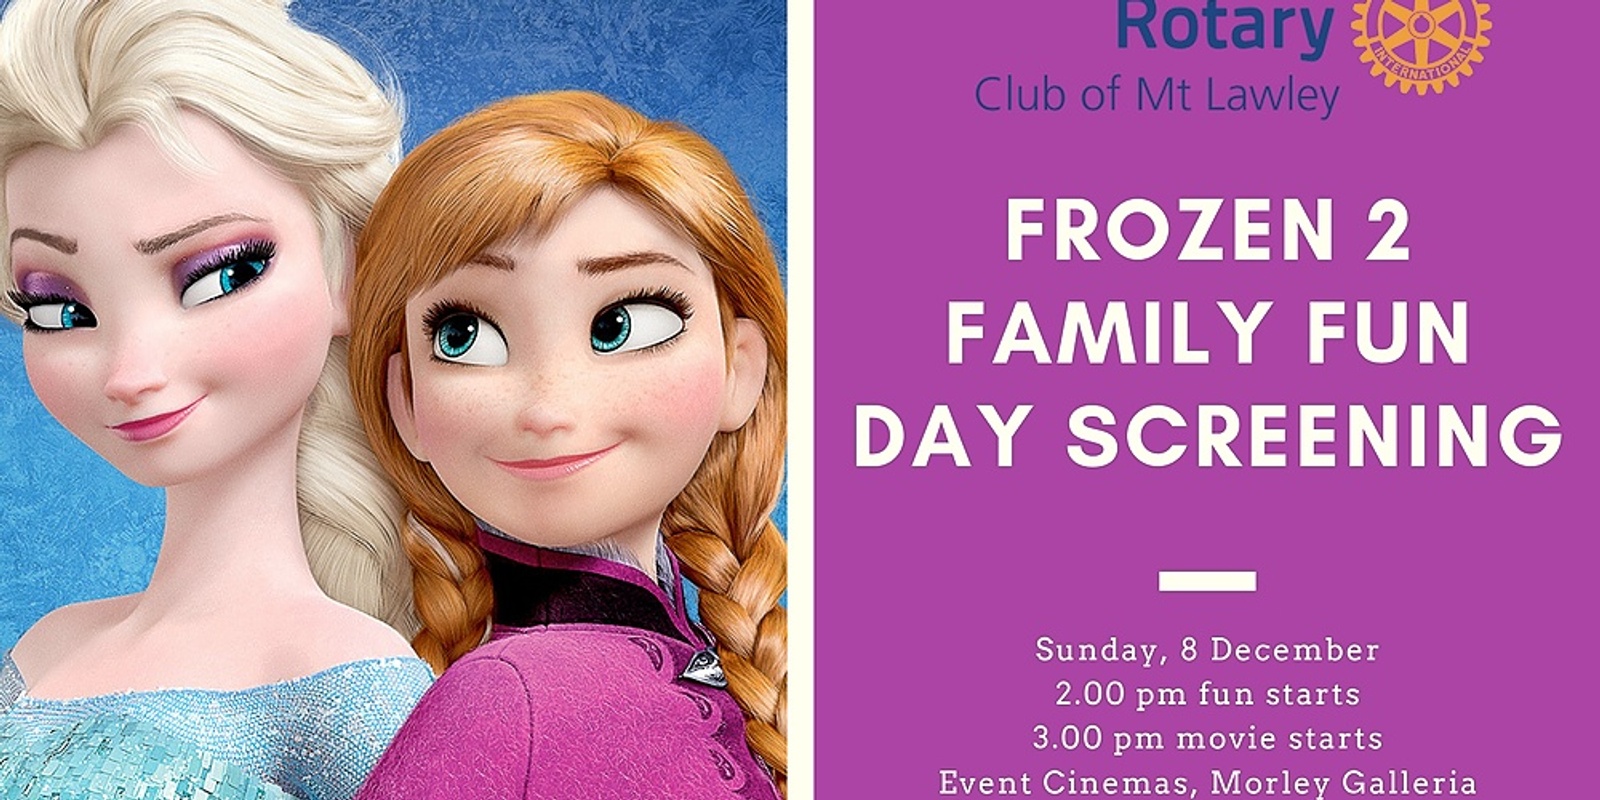 Banner image for Rotary Club of Mt Lawley Family Fun Day Screening of Frozen 2